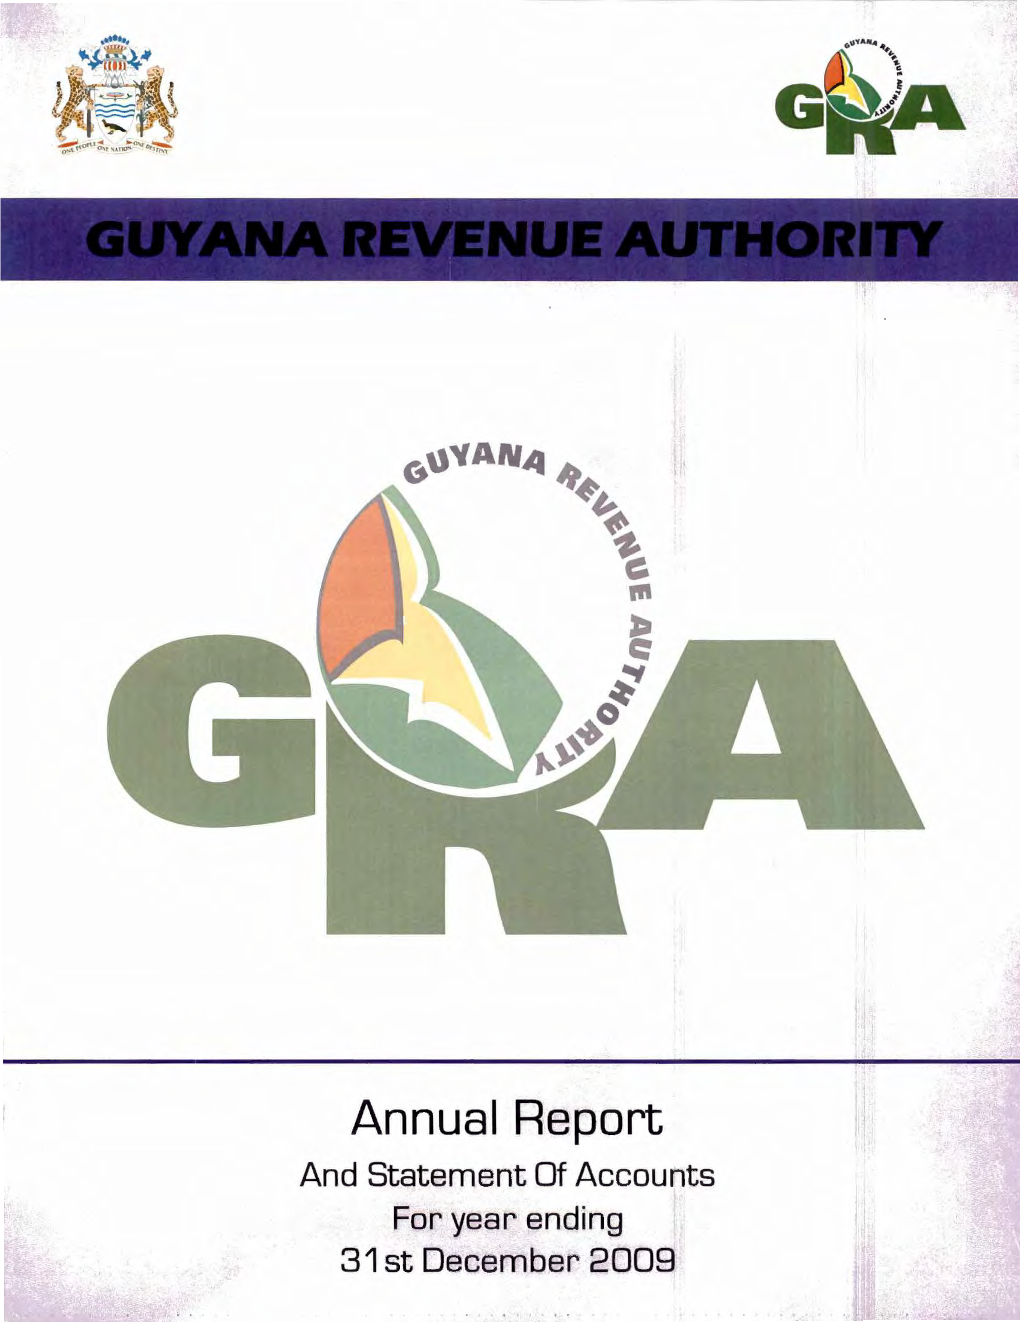 Annual Report and Statement of Accounts for Year Ending 31St December 2009 AUIHORITY